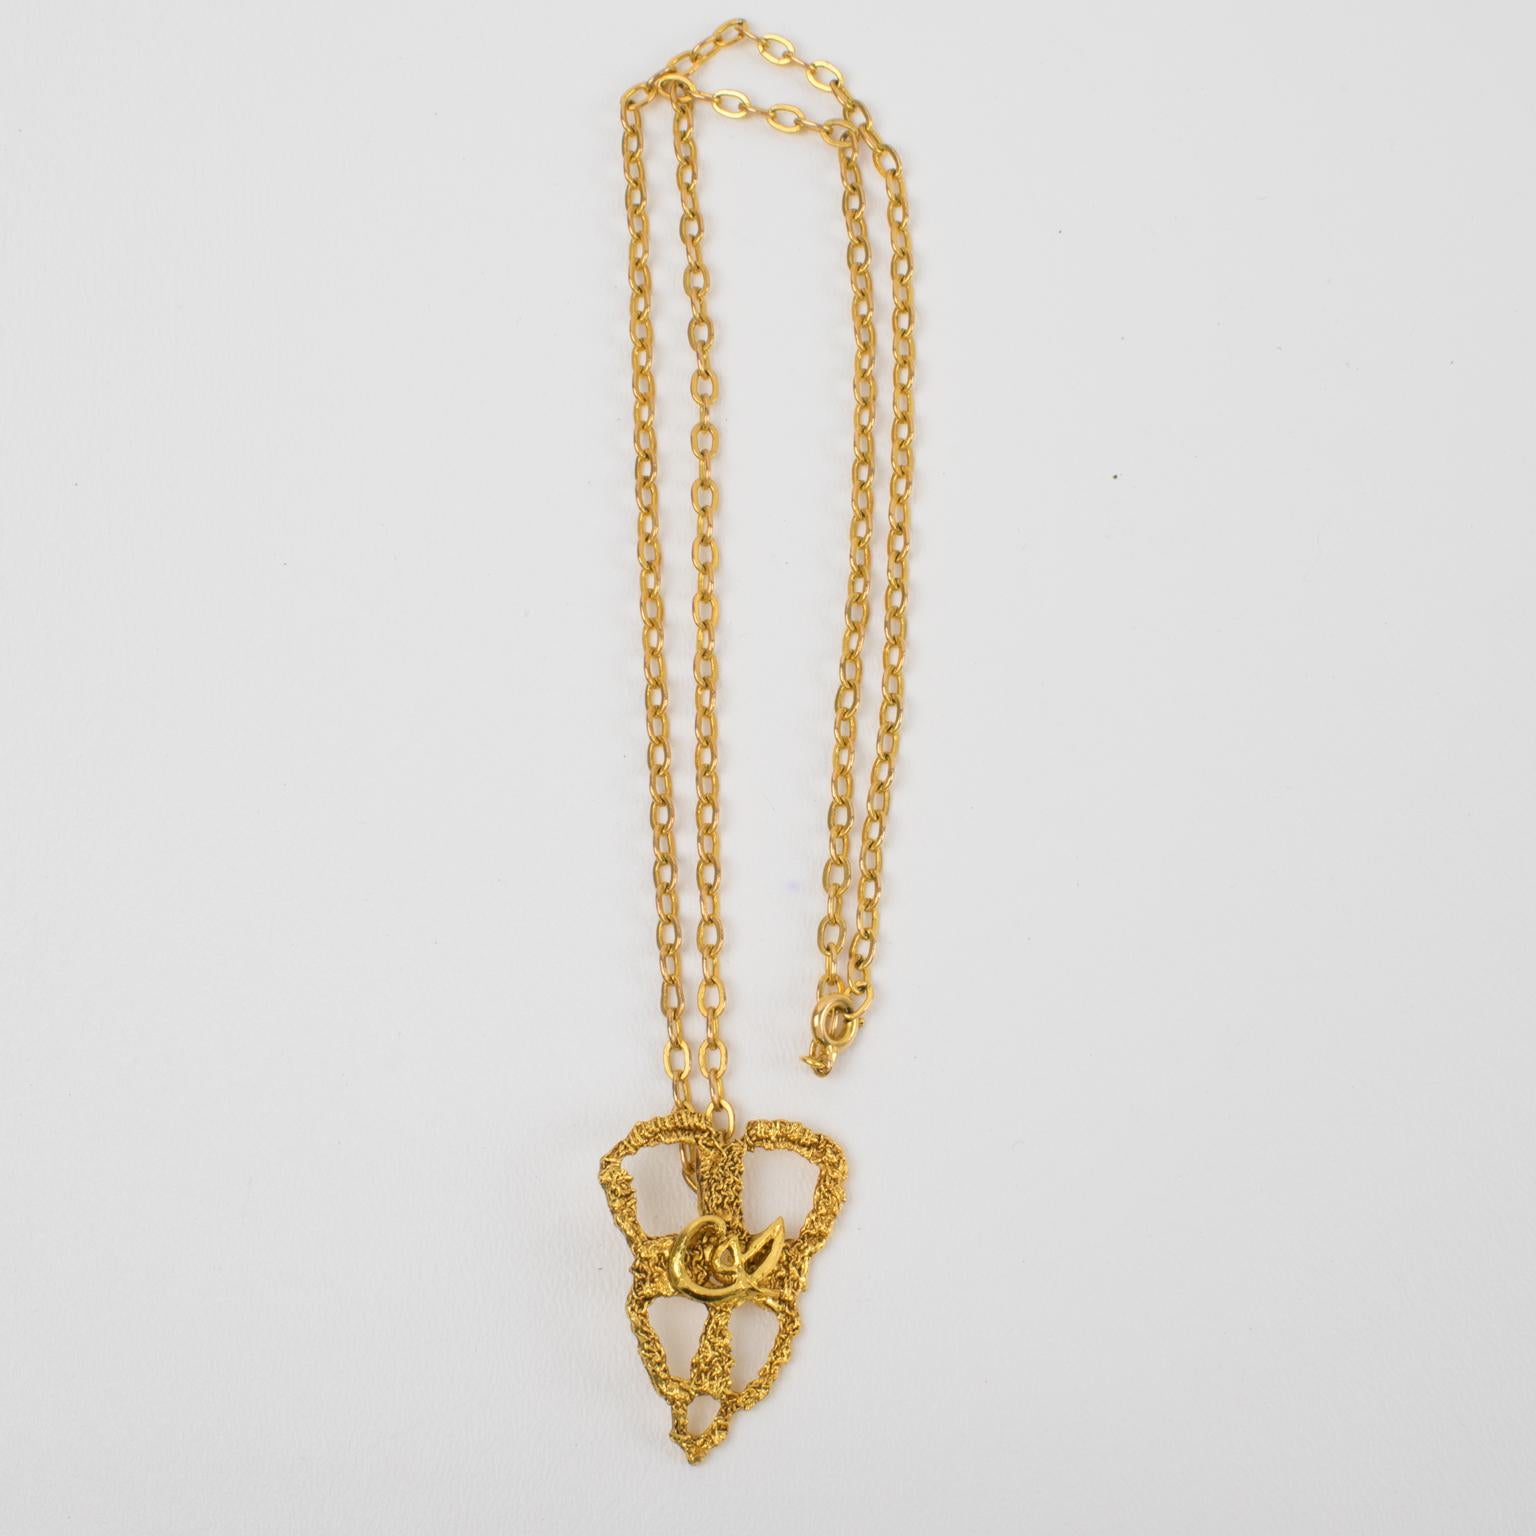 Christian Lacroix Gilt Metal Lace Pendant Necklace In Excellent Condition For Sale In Atlanta, GA